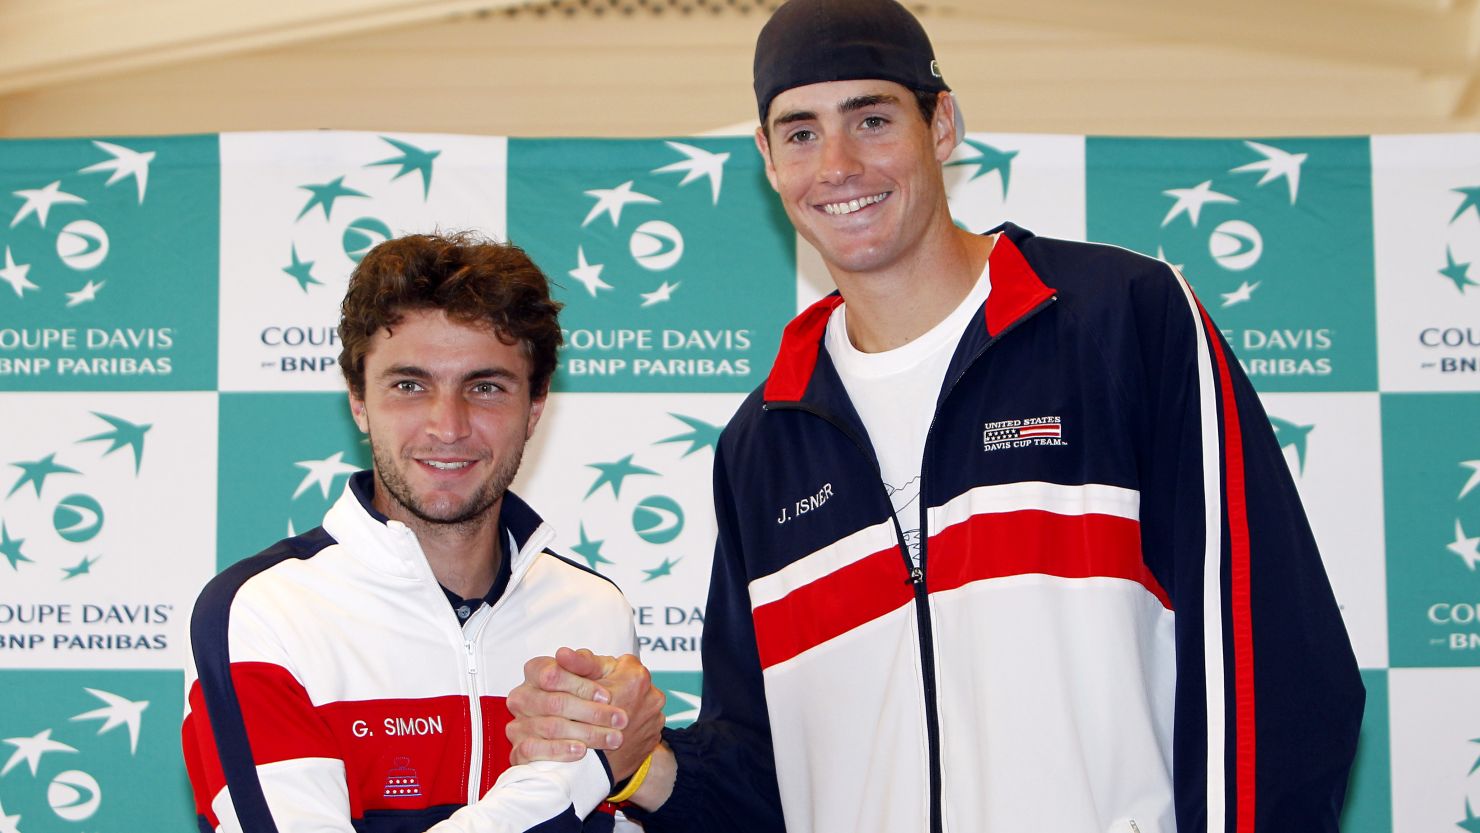 America's John Isner (right) beat Gilles Simon in straight sets to tie the Davis Cup World Group quarterfinal on Friday